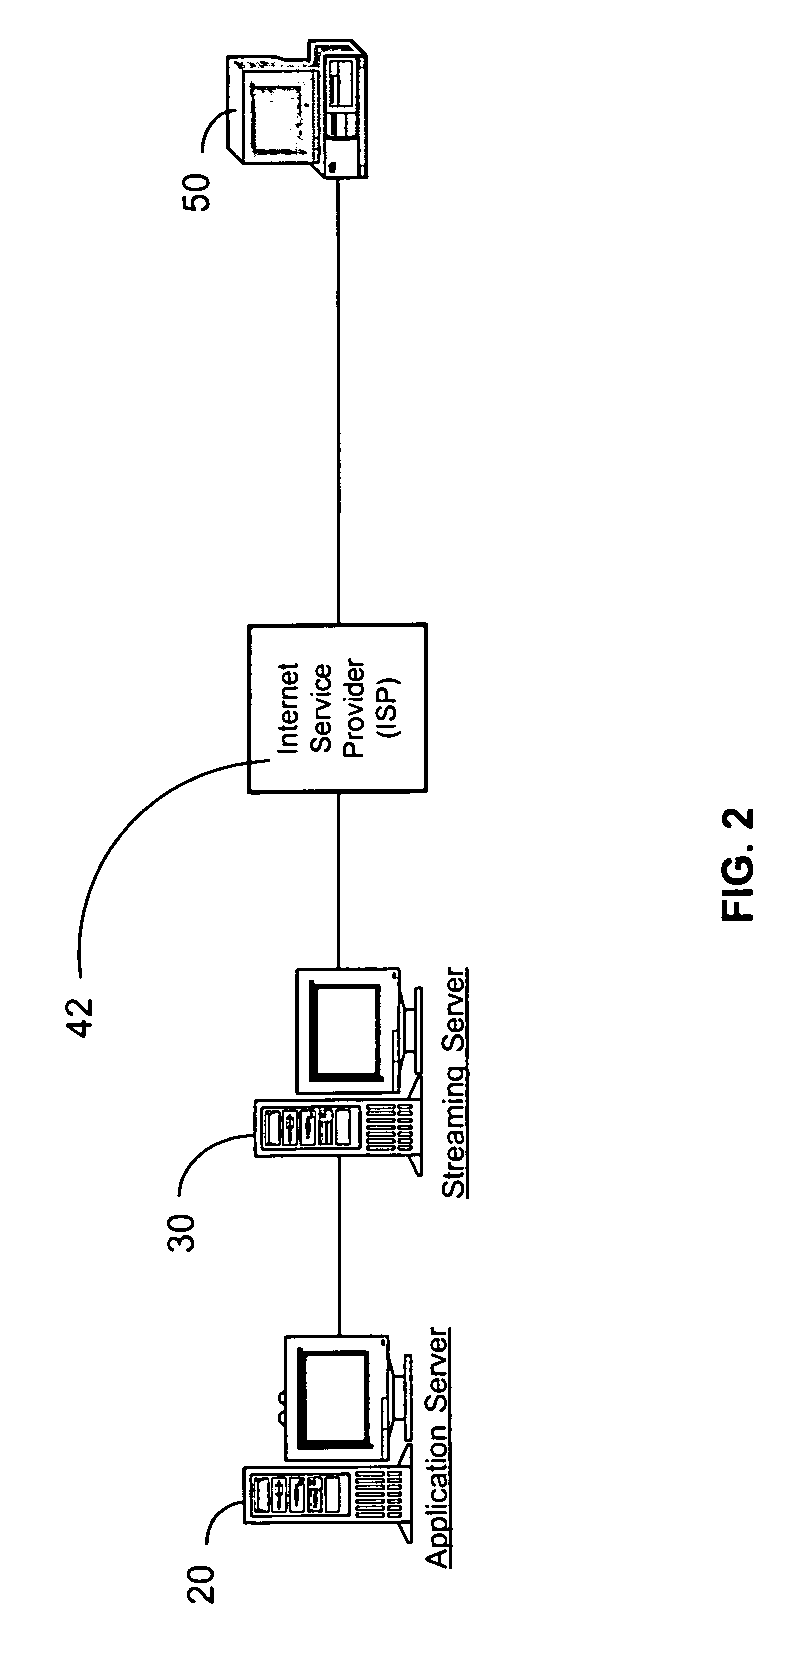 Application server and streaming server streaming multimedia file in a client specific format